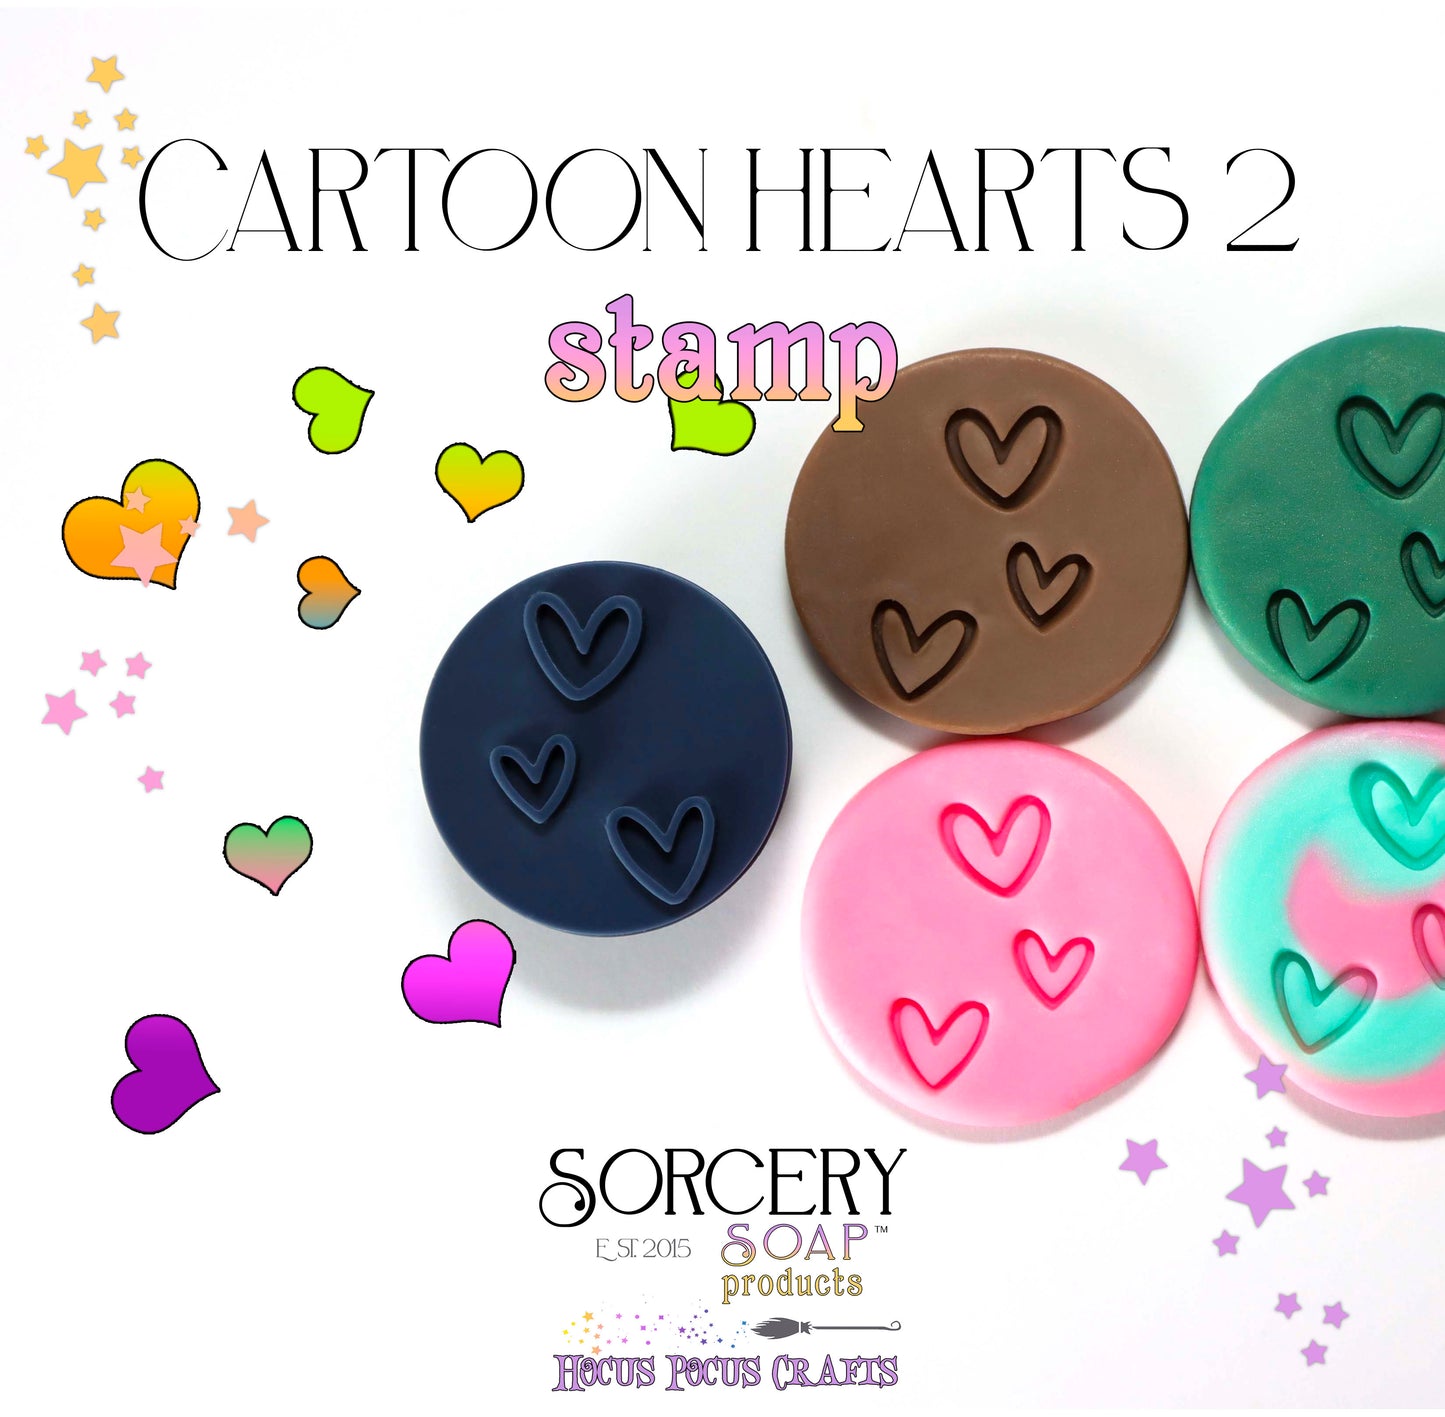 Party - Cartoon Hearts 2 Stamp